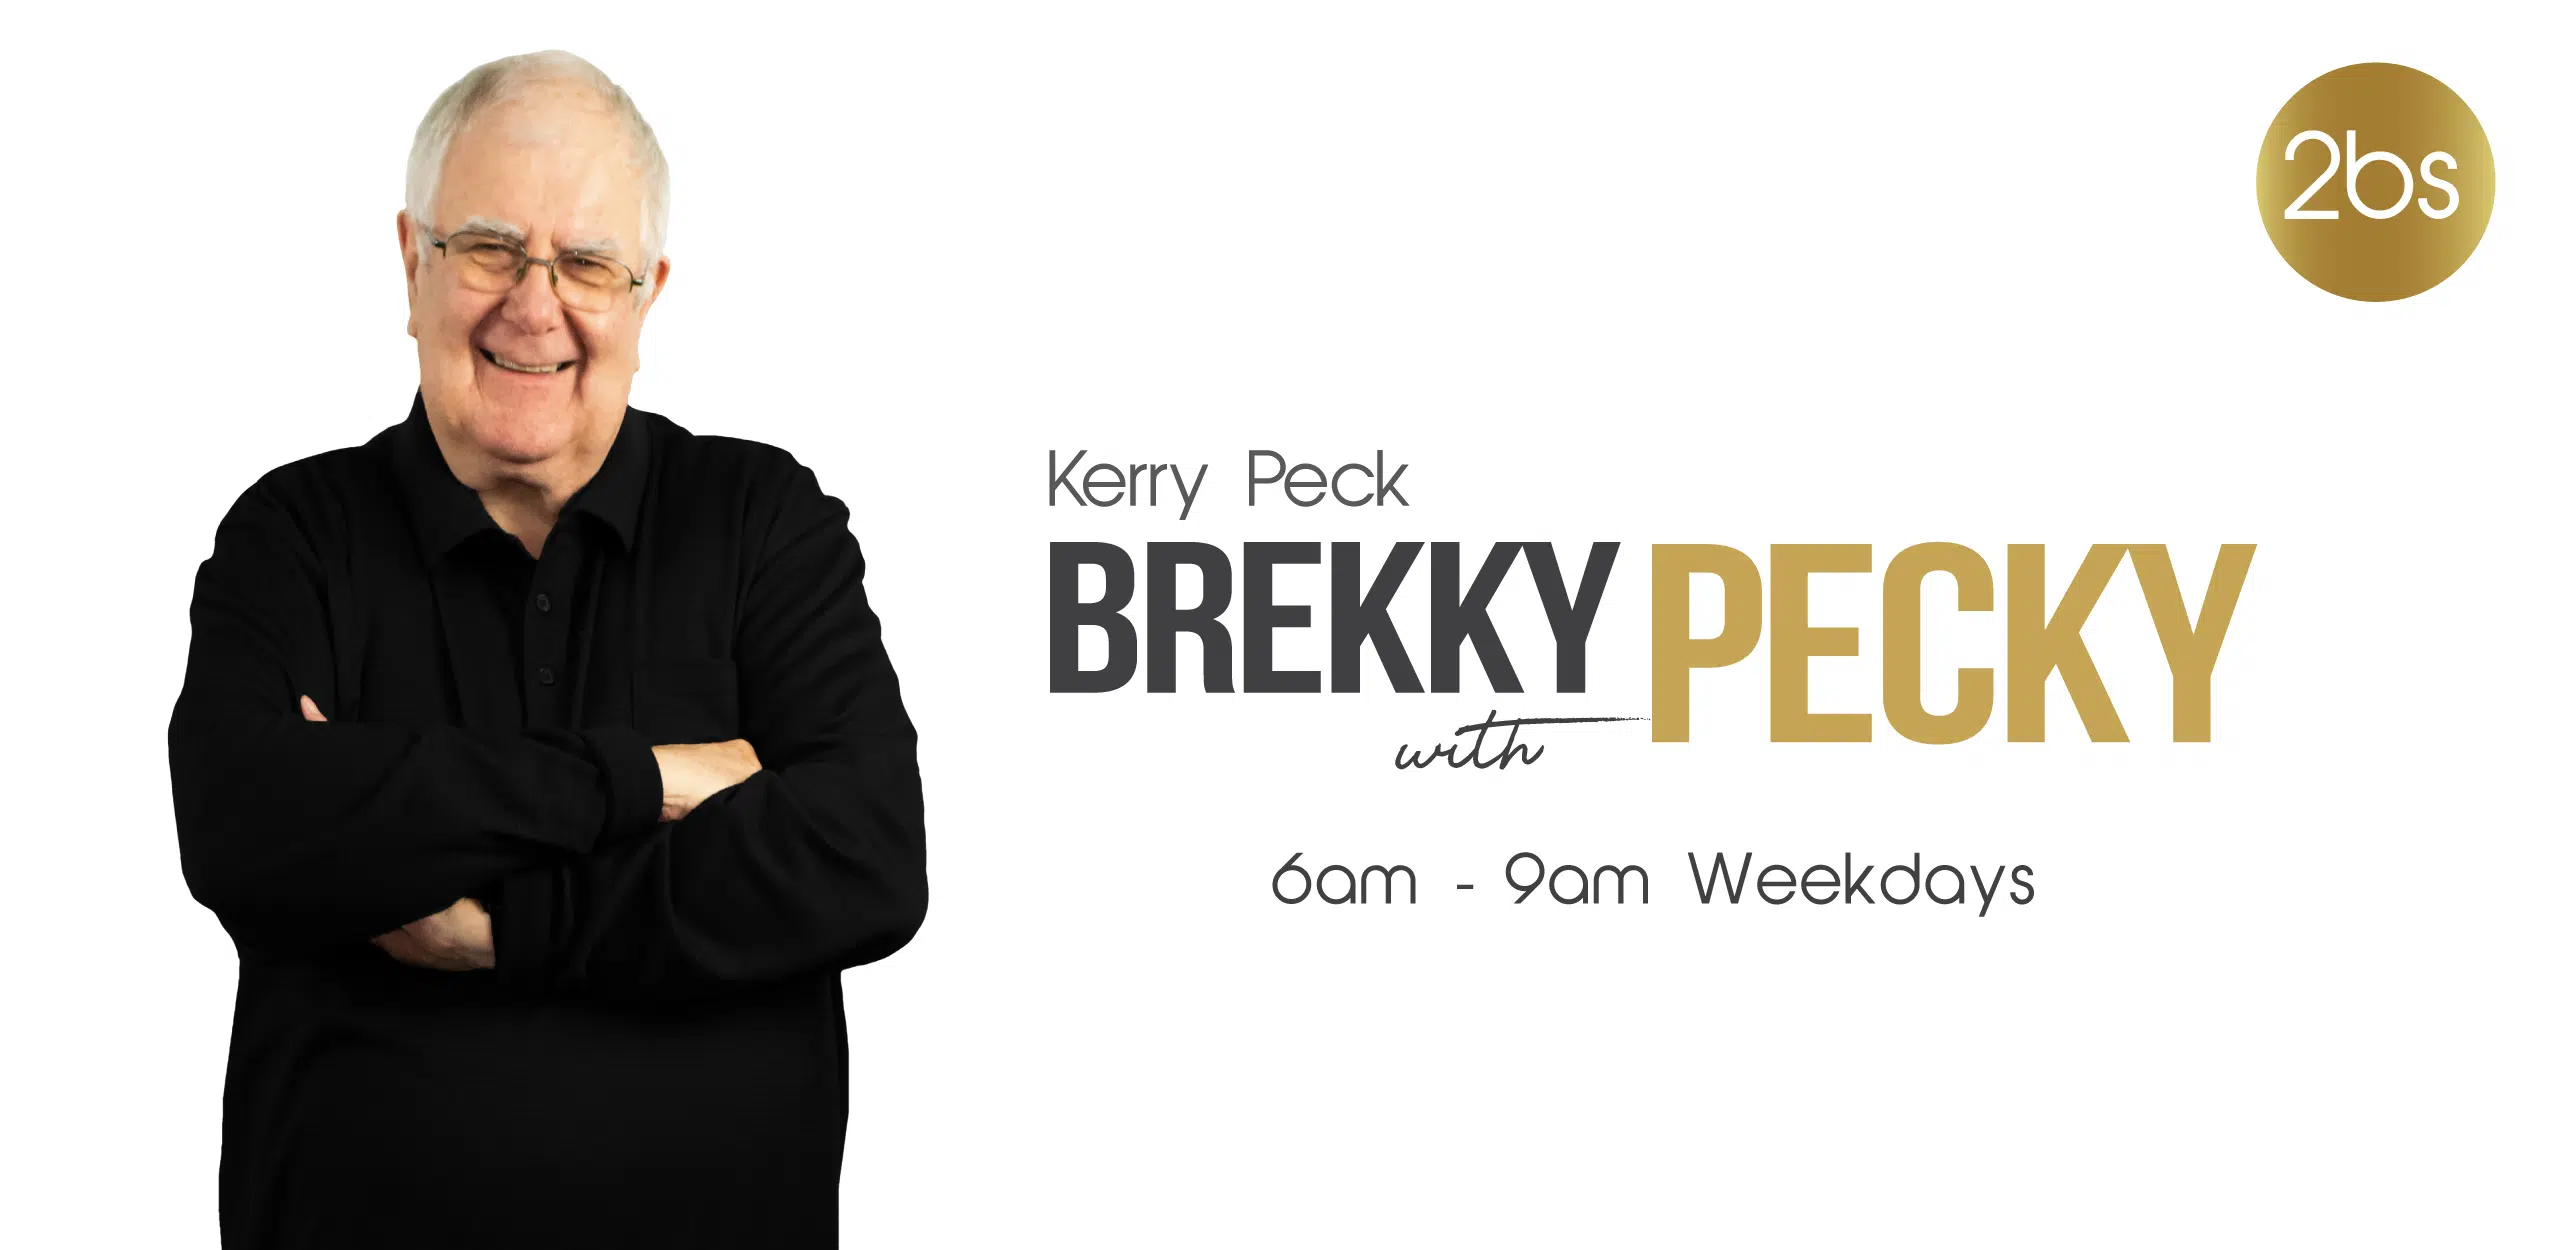 Feature: https://www.2bs.com.au/brekky-with-pecky/